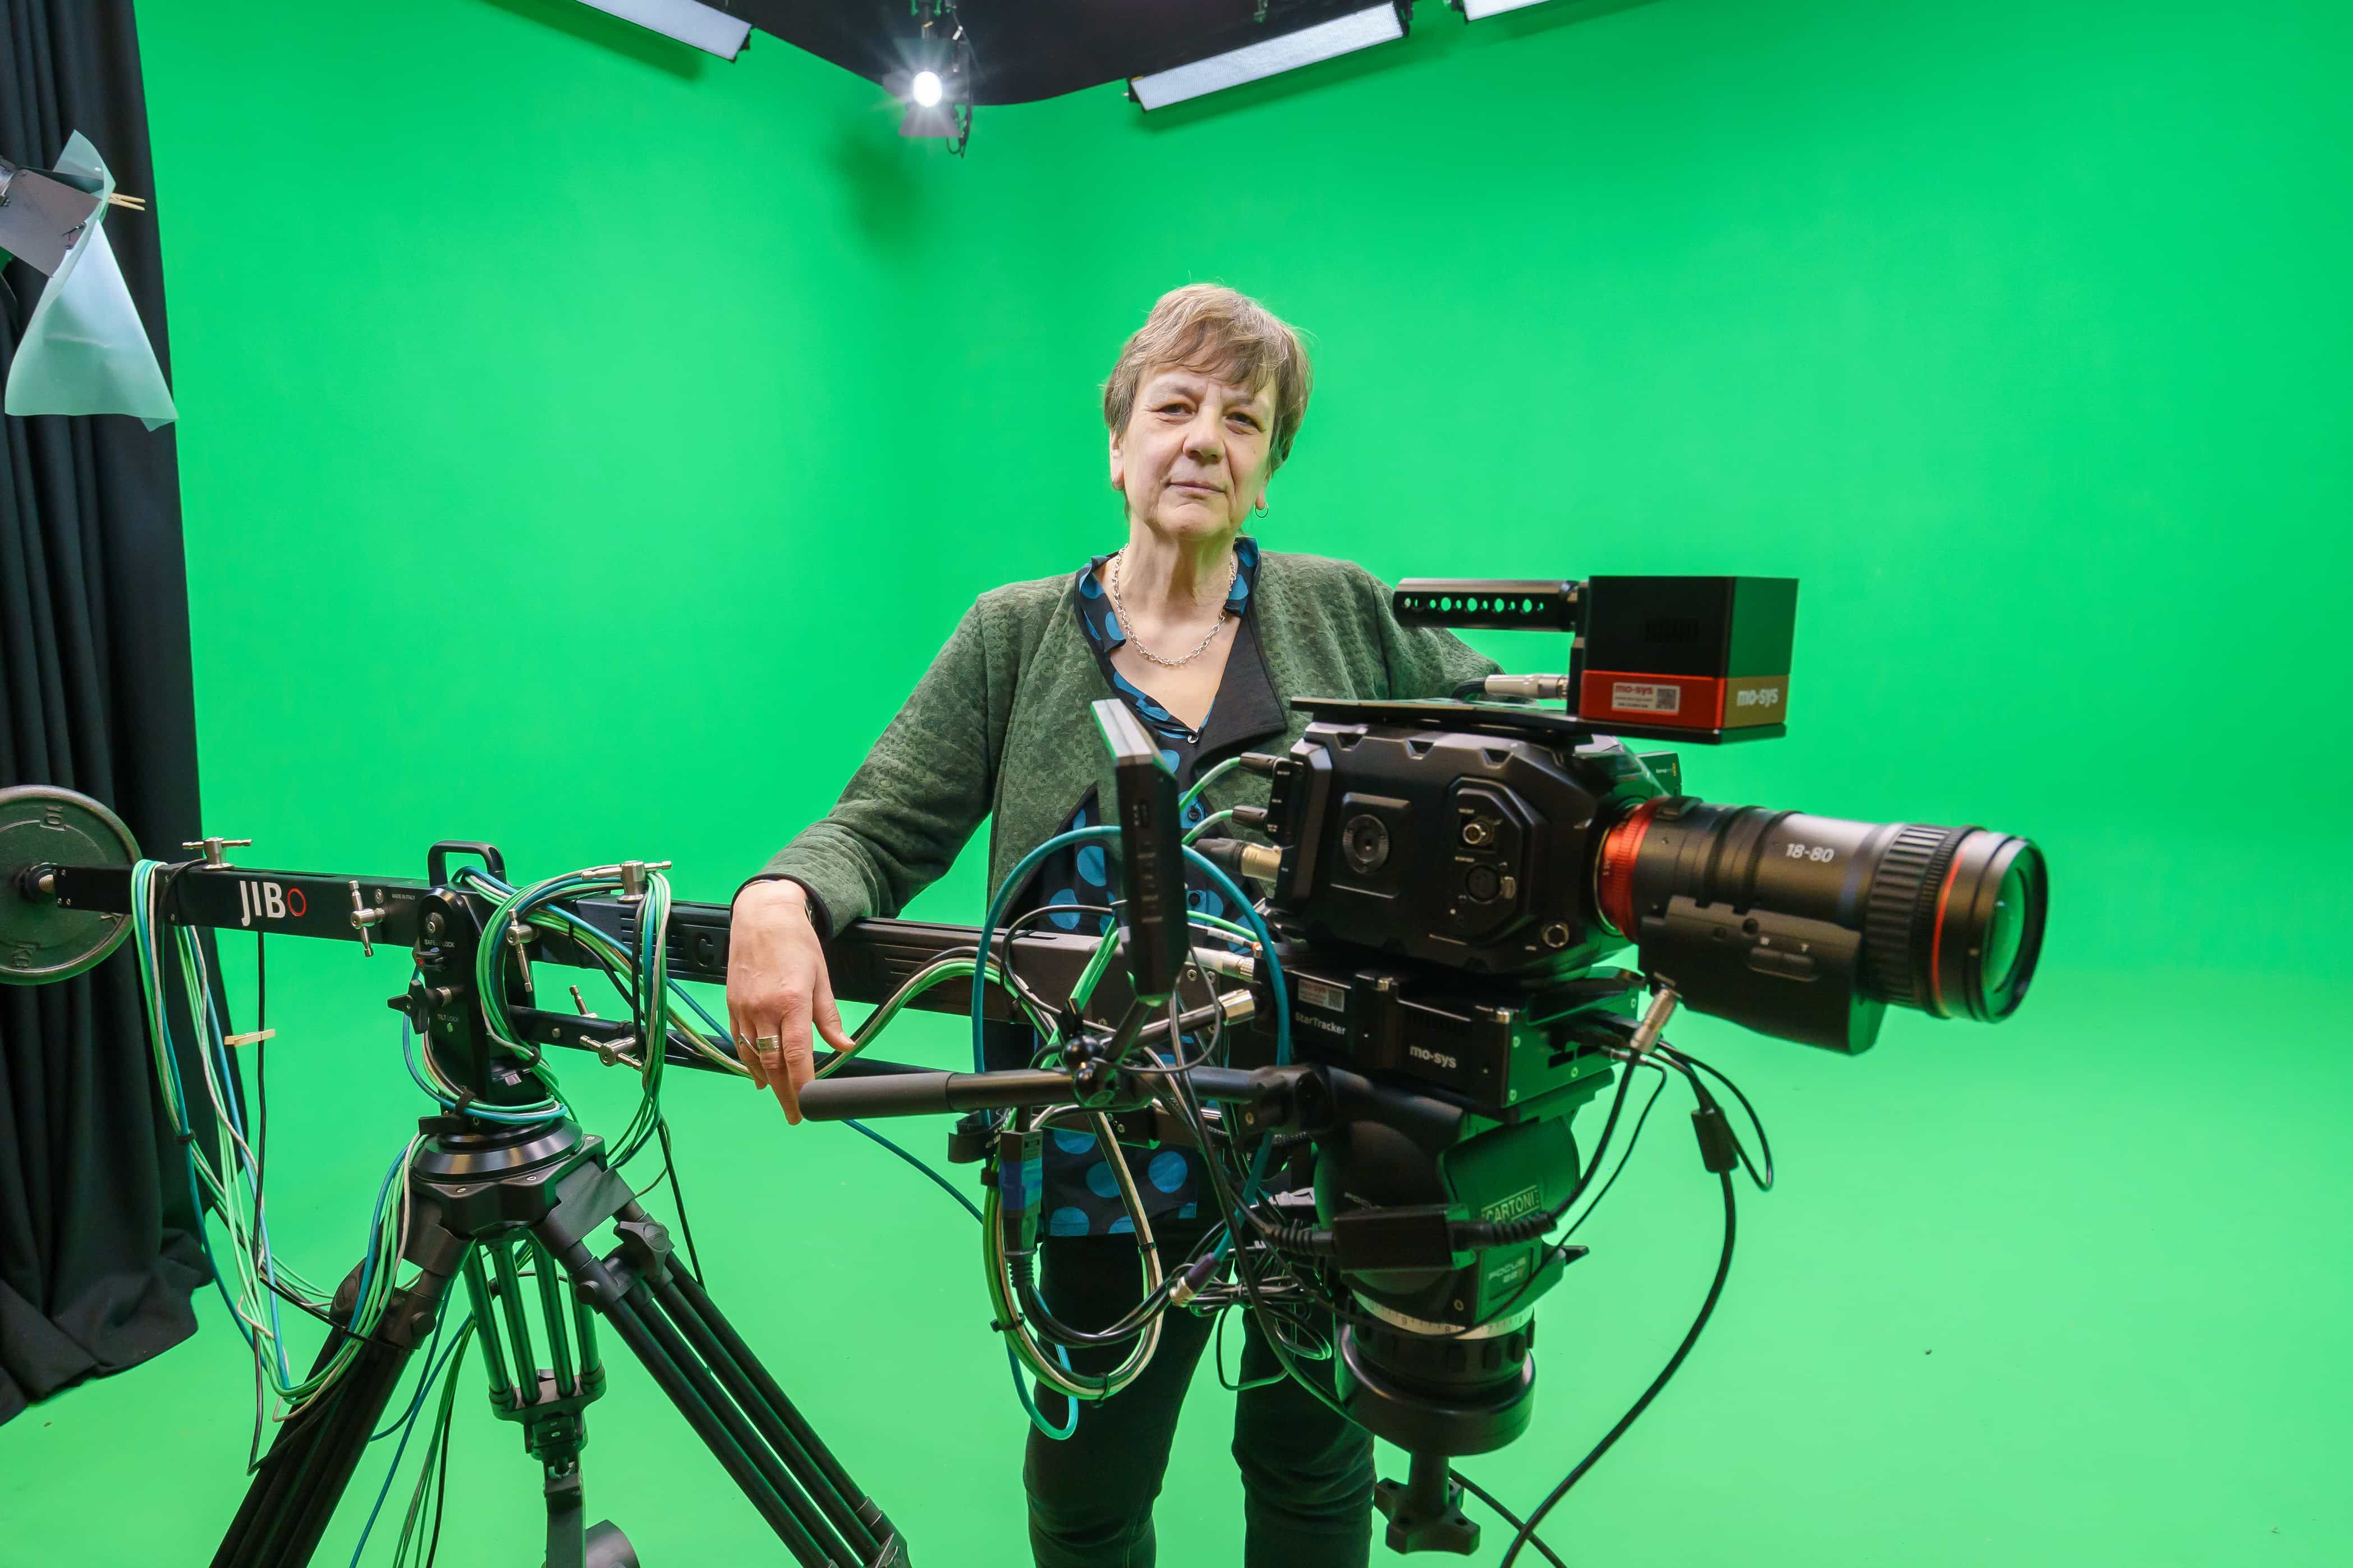 Professor Arabella Plouviez, Dean of the Faculty of Arts and Creative Industries standing next to a camera in the Chroma studio